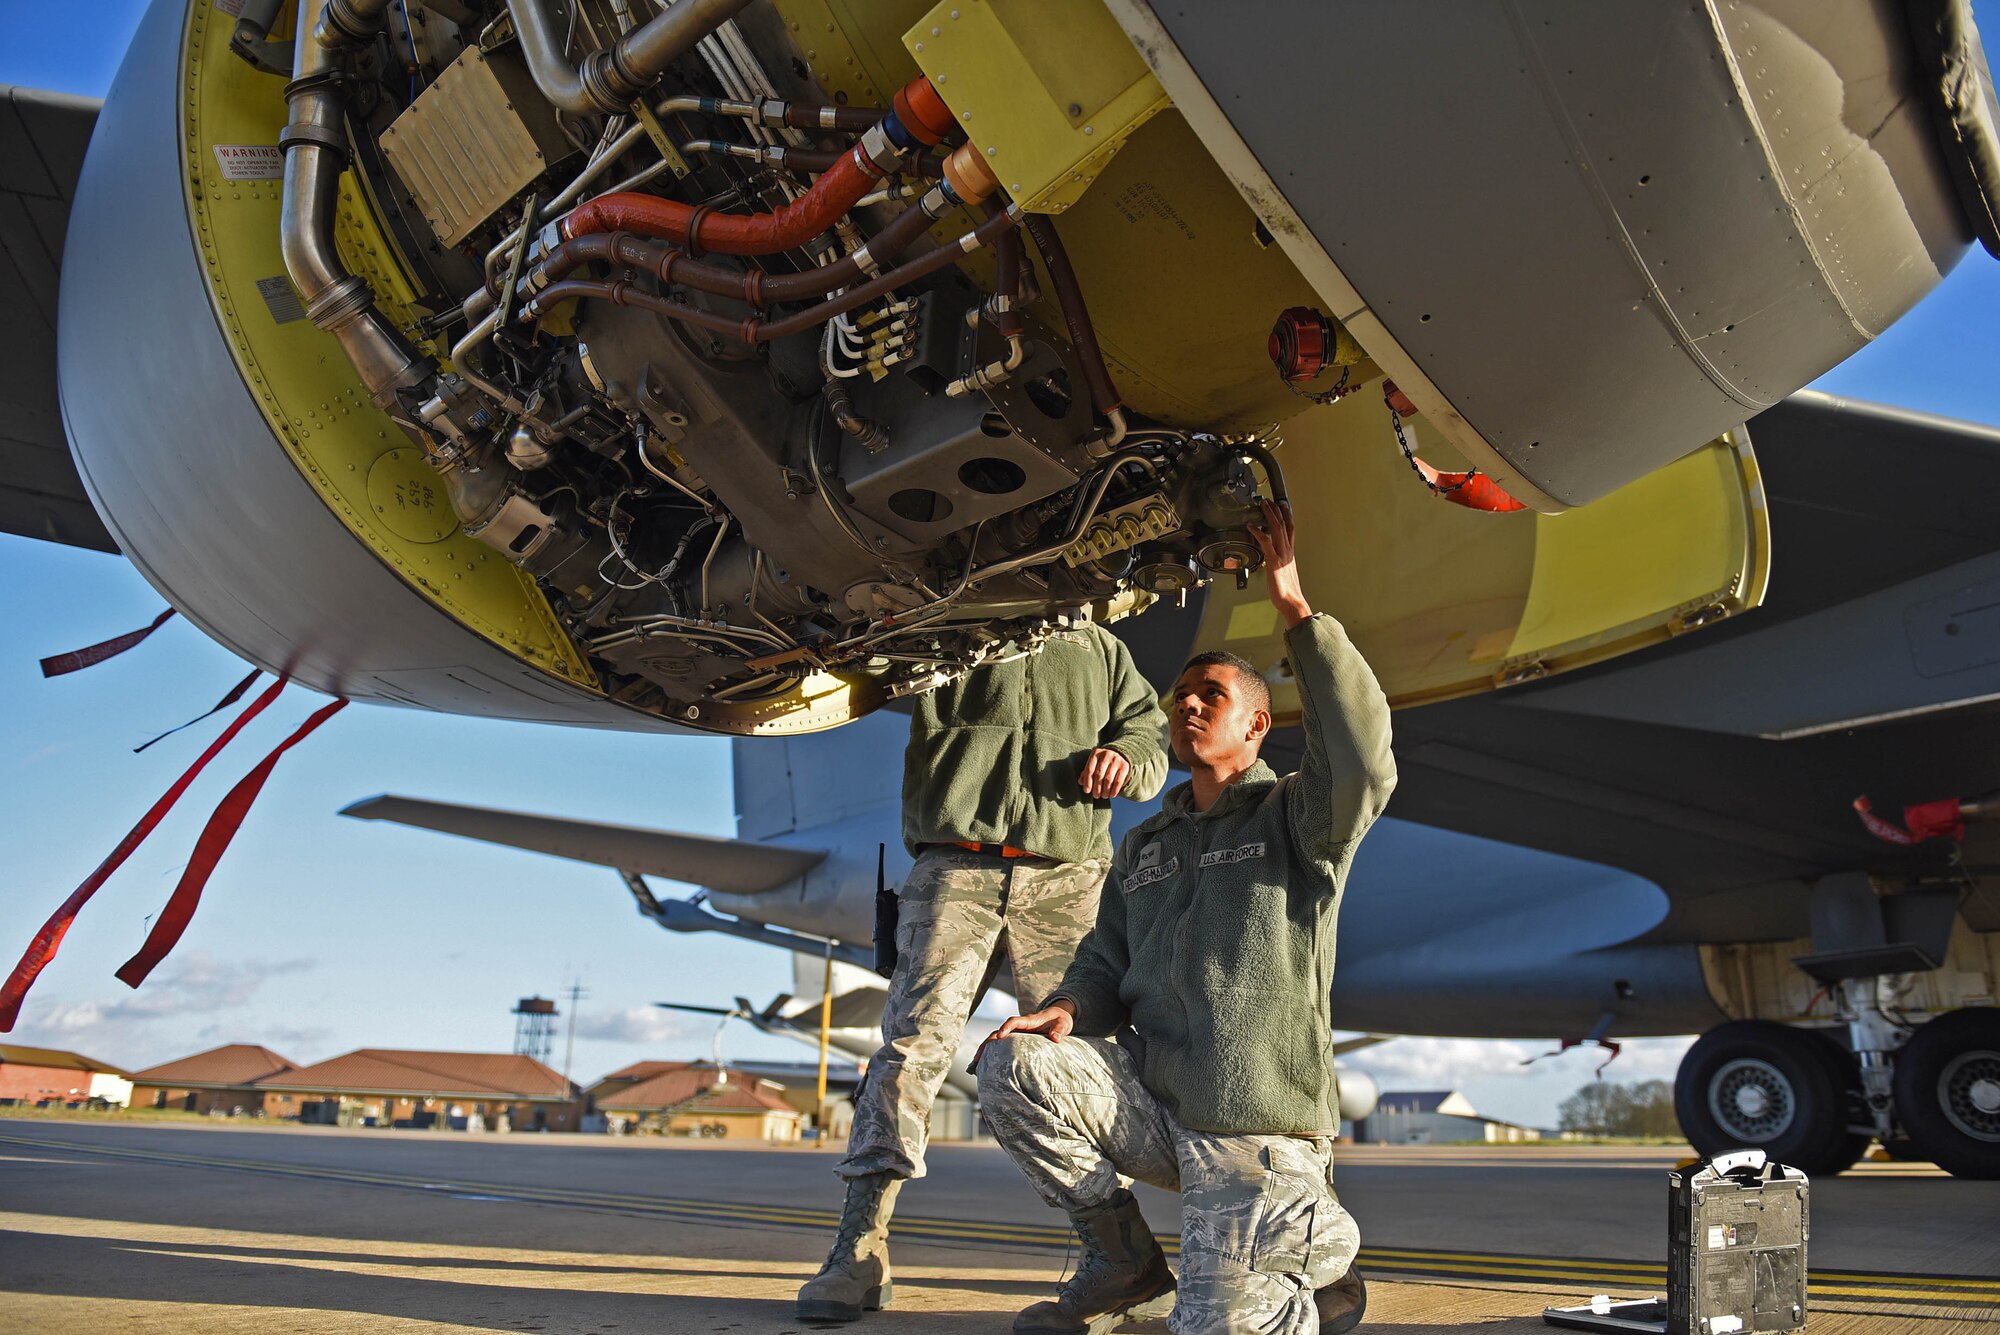 U.S. Air Force Tech. Sgt. Torrey Sanchez, 100th Aircraft Maintenance Squadron aerospace propulsion lead technician, and Senior Airman Ian Hernandez-Mancilla, 100th AMXS aerospace propulsion journeyman, inspects a KC-135 Stratotanker engine at RAF Mildenhall, England, Nov. 30, 2018. The aerospace propulsion Airmen’s success is exemplified through the Bloody Hundredth’s mission as a ready force and strategic forward base, projecting airpower through unrivaled air refueling across Europe and Africa. (U.S. Air Force photo by Senior Airman Luke Milano)